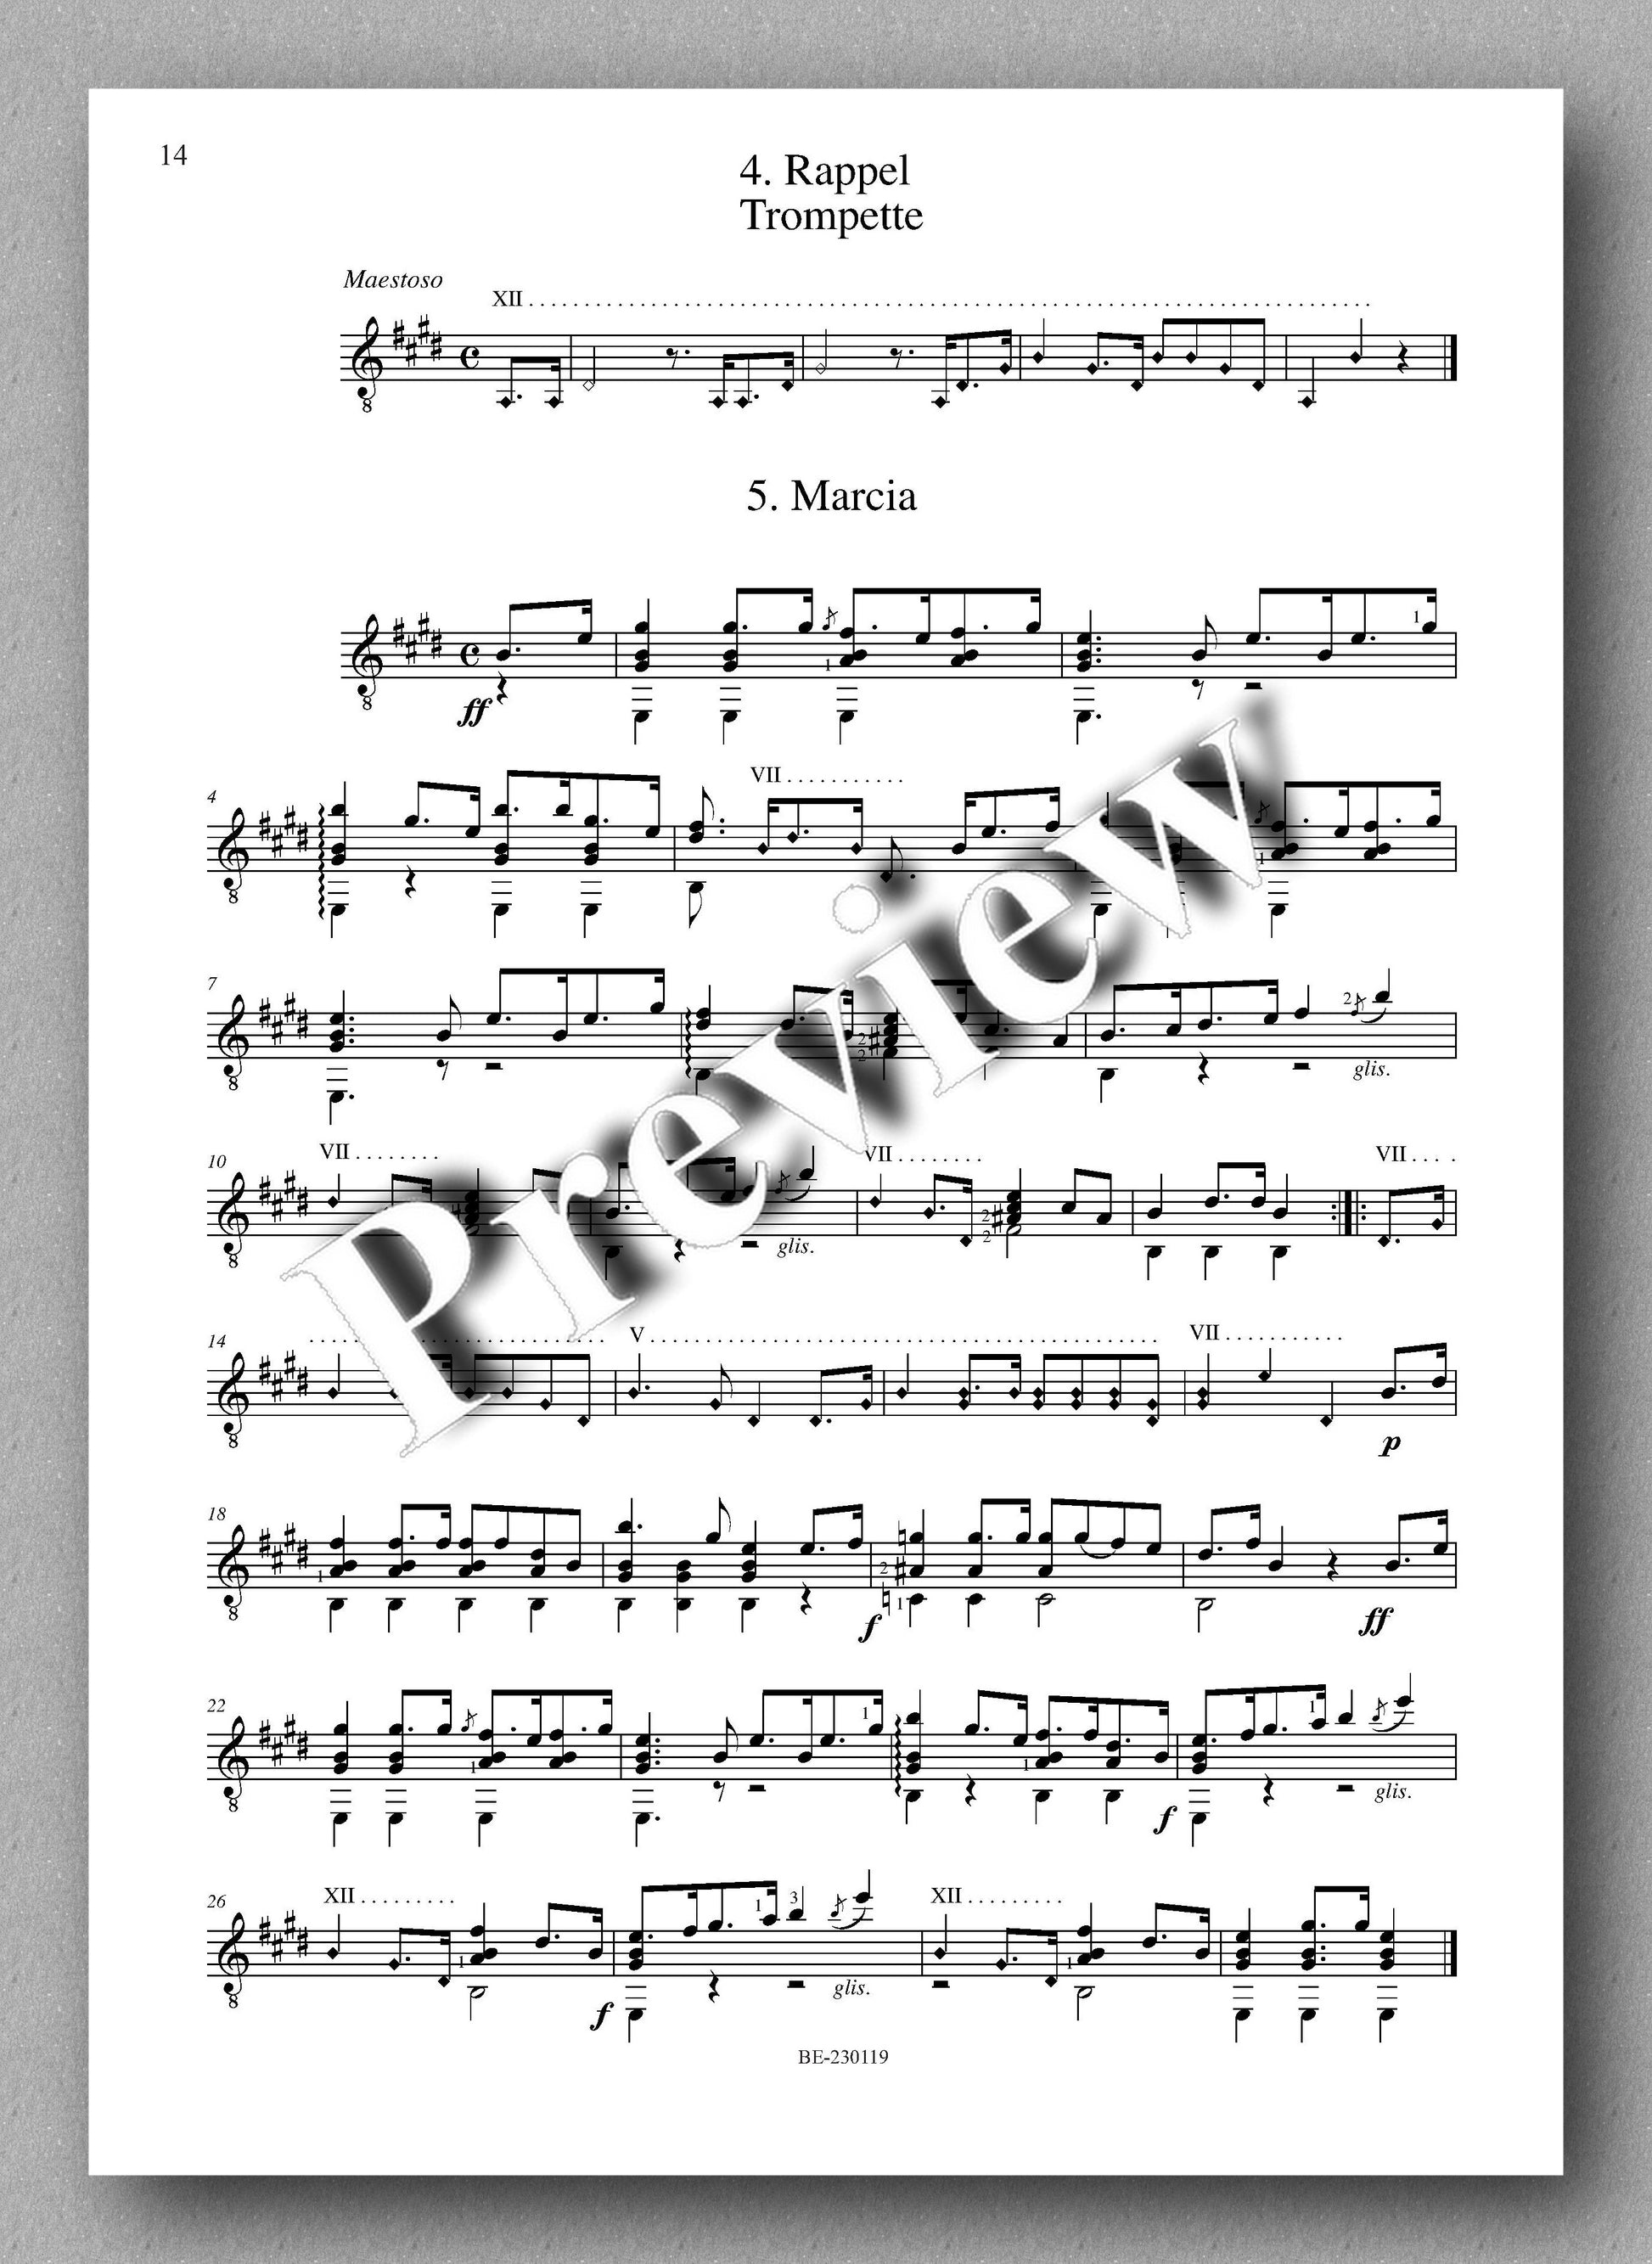 Molino, Collected Works for Guitar Solo, Vol. 31 - preview of the music score 4